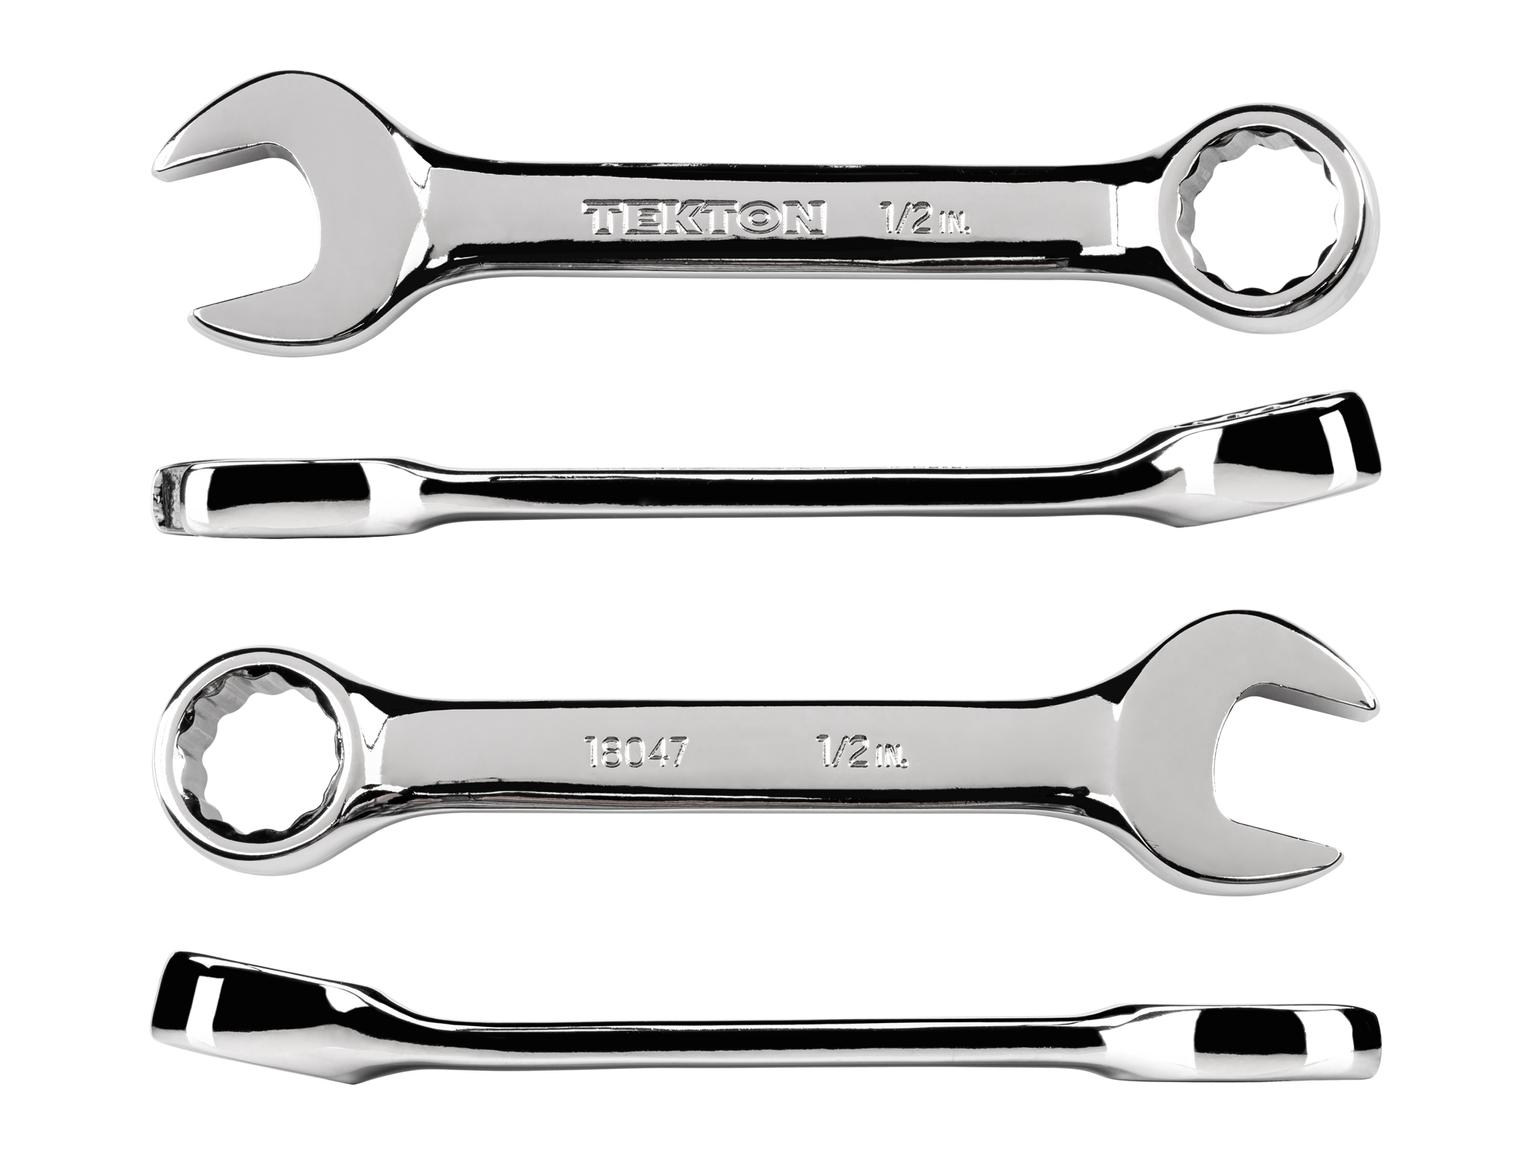 TEKTON 18047-T 1/2 Inch Stubby Combination Wrench